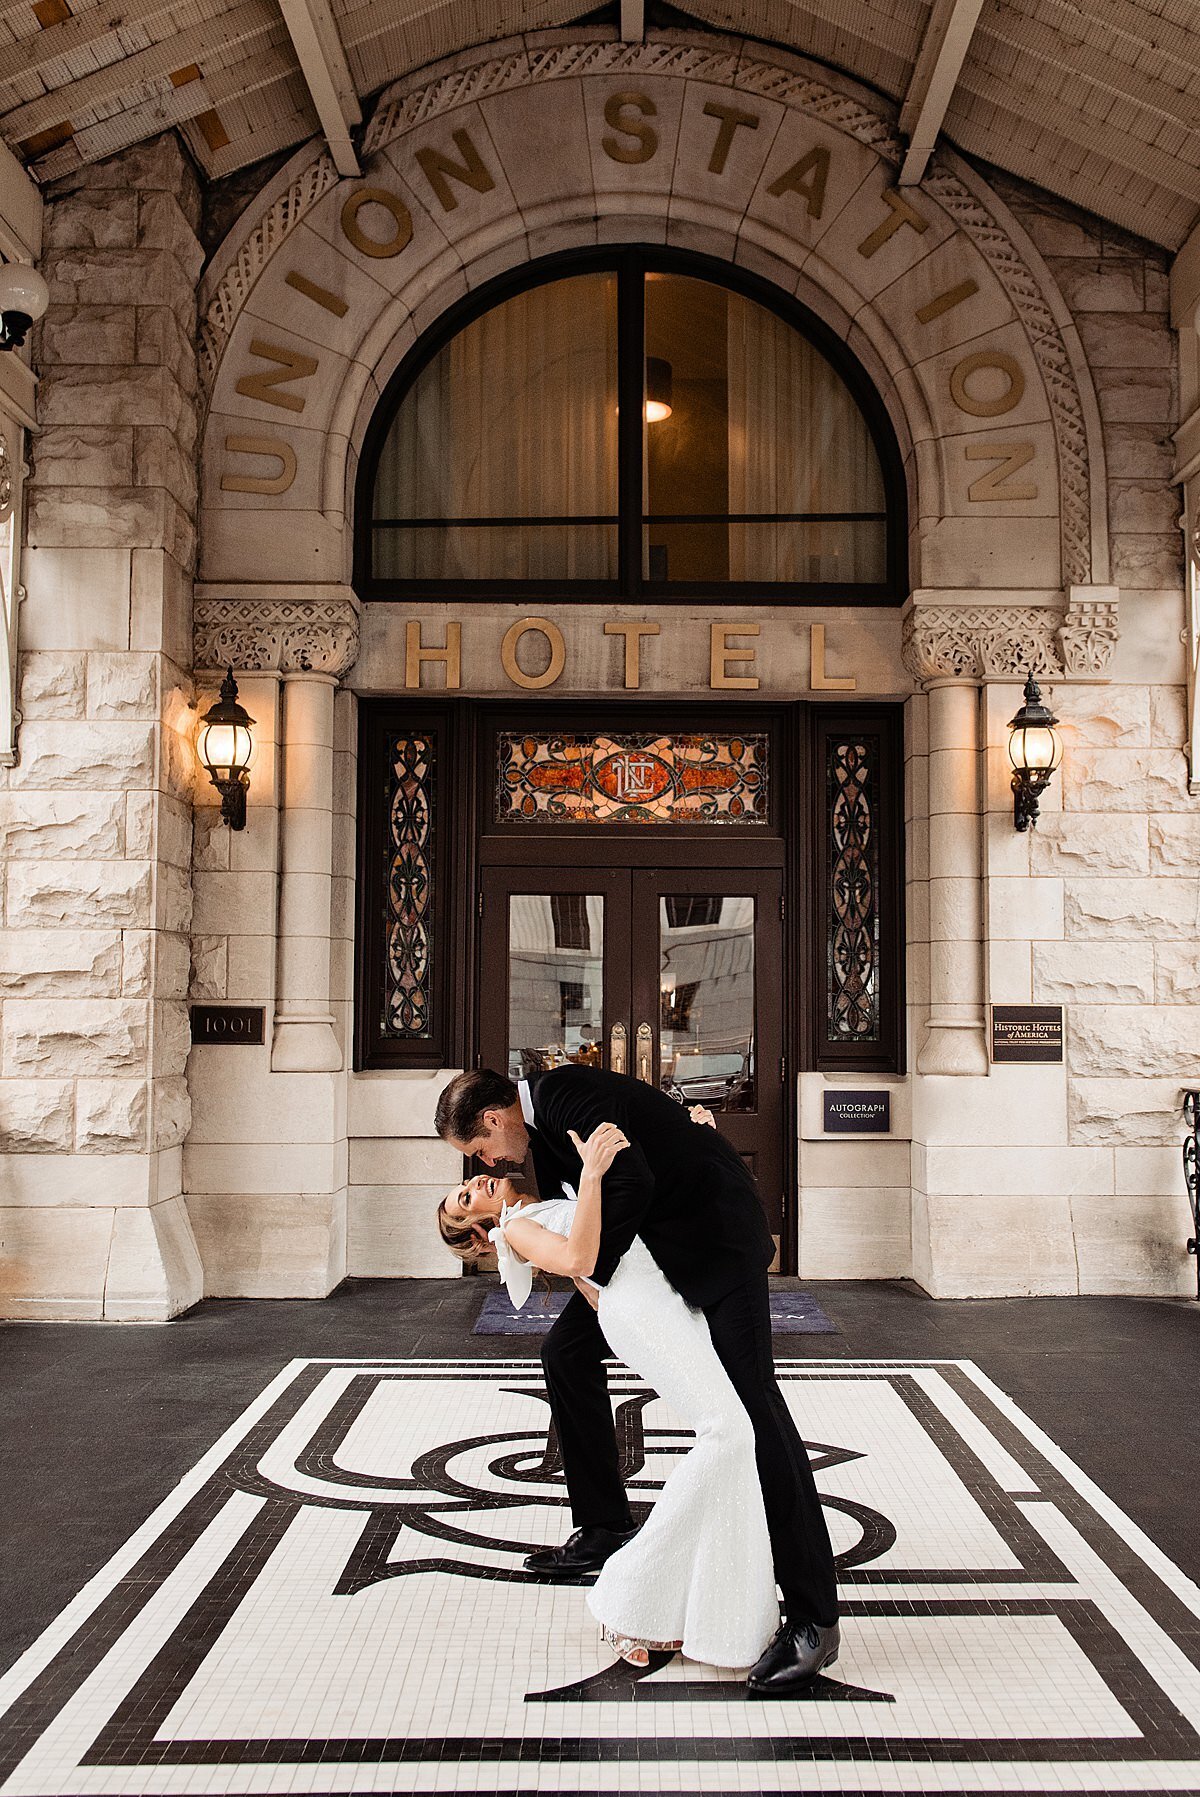 The groom dip the bride as he kisses her in front of the main entrance of the Union Station Hotel in Nashville. The bride is wearing a floor length  fitted sheath dress with a ruffle over the shoulder. The groom is wearing a black tuxedo  with a white shirt. They are standing on the mosaic floor in front of the hotel. Featured is a large white rectangle bordered in black with USH written out as a monogram for the hotel.  Behind them is the rough hewn stone historic train station in downtown Nashville. The  door frame is dark wood with stained glass windows and transoms. On either side of the doors are two round sconces lit up. Above the door is a large half oval window with a curtain drawn in front of it. The words Union Station Hotel is detailed around the arch of the window in large gold lettering.